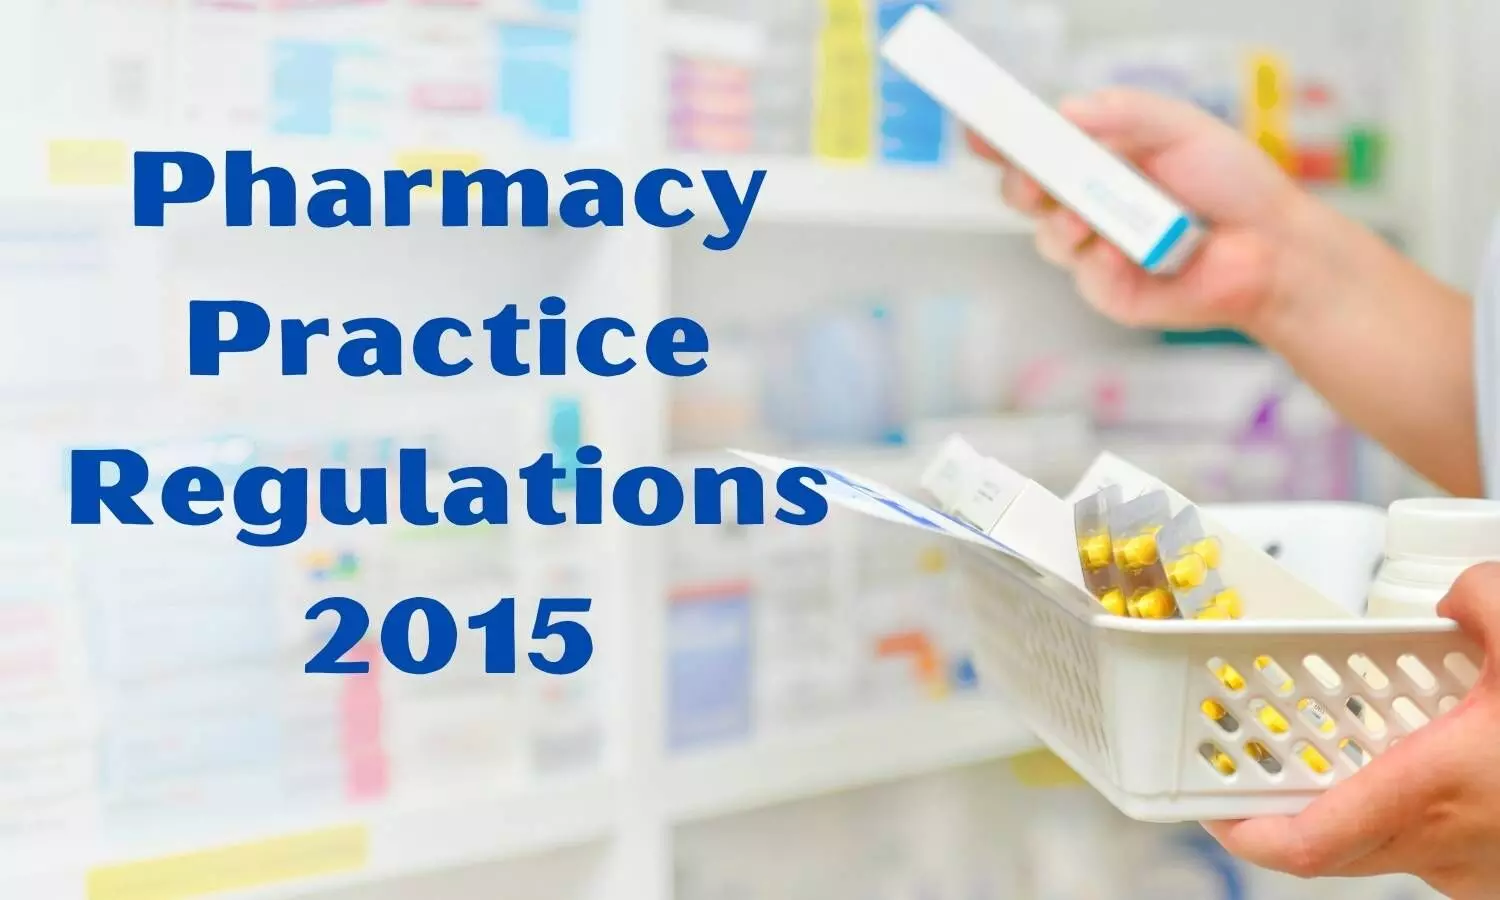 Pharmacy Council of India mandates urgent implementation of Pharmacy Practice Regulations for pharmacists